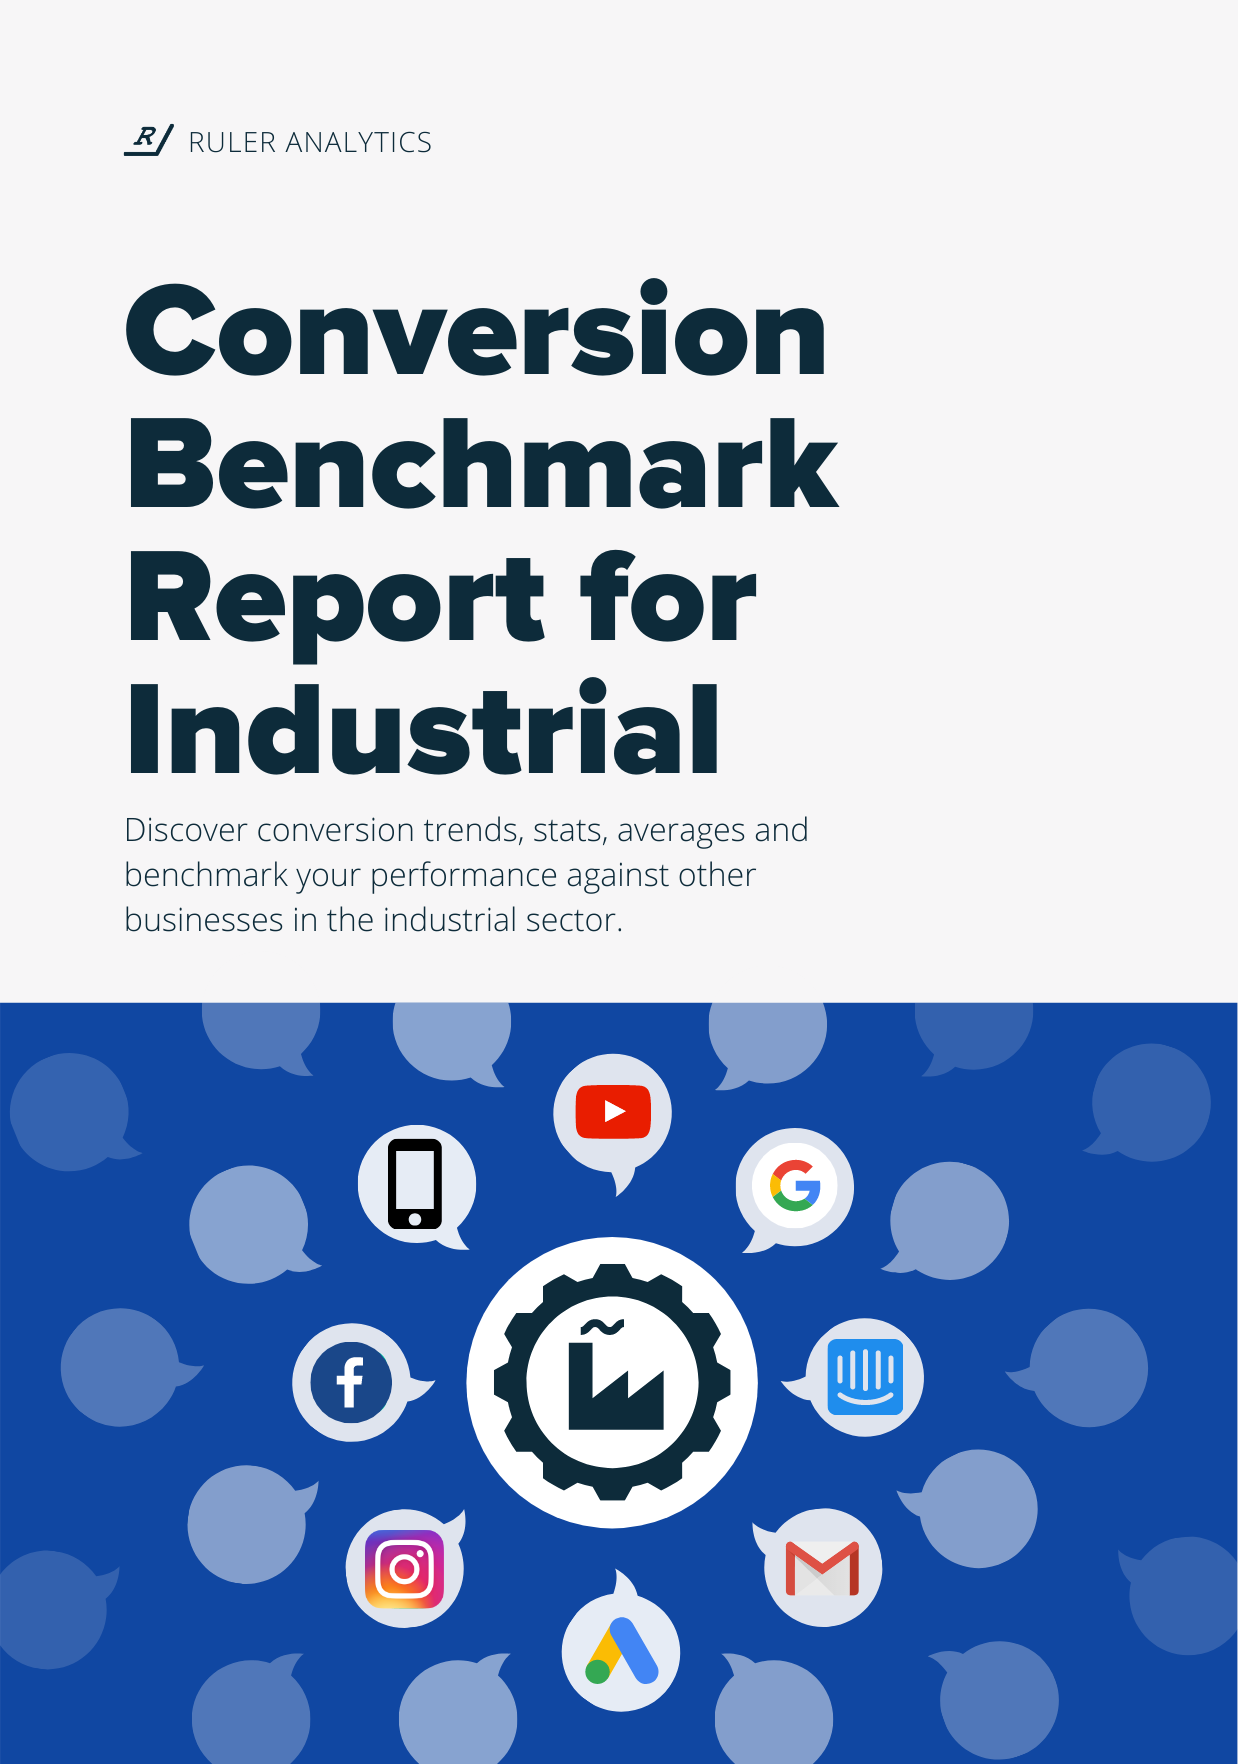 Conversion Benchmark Report for Industrial